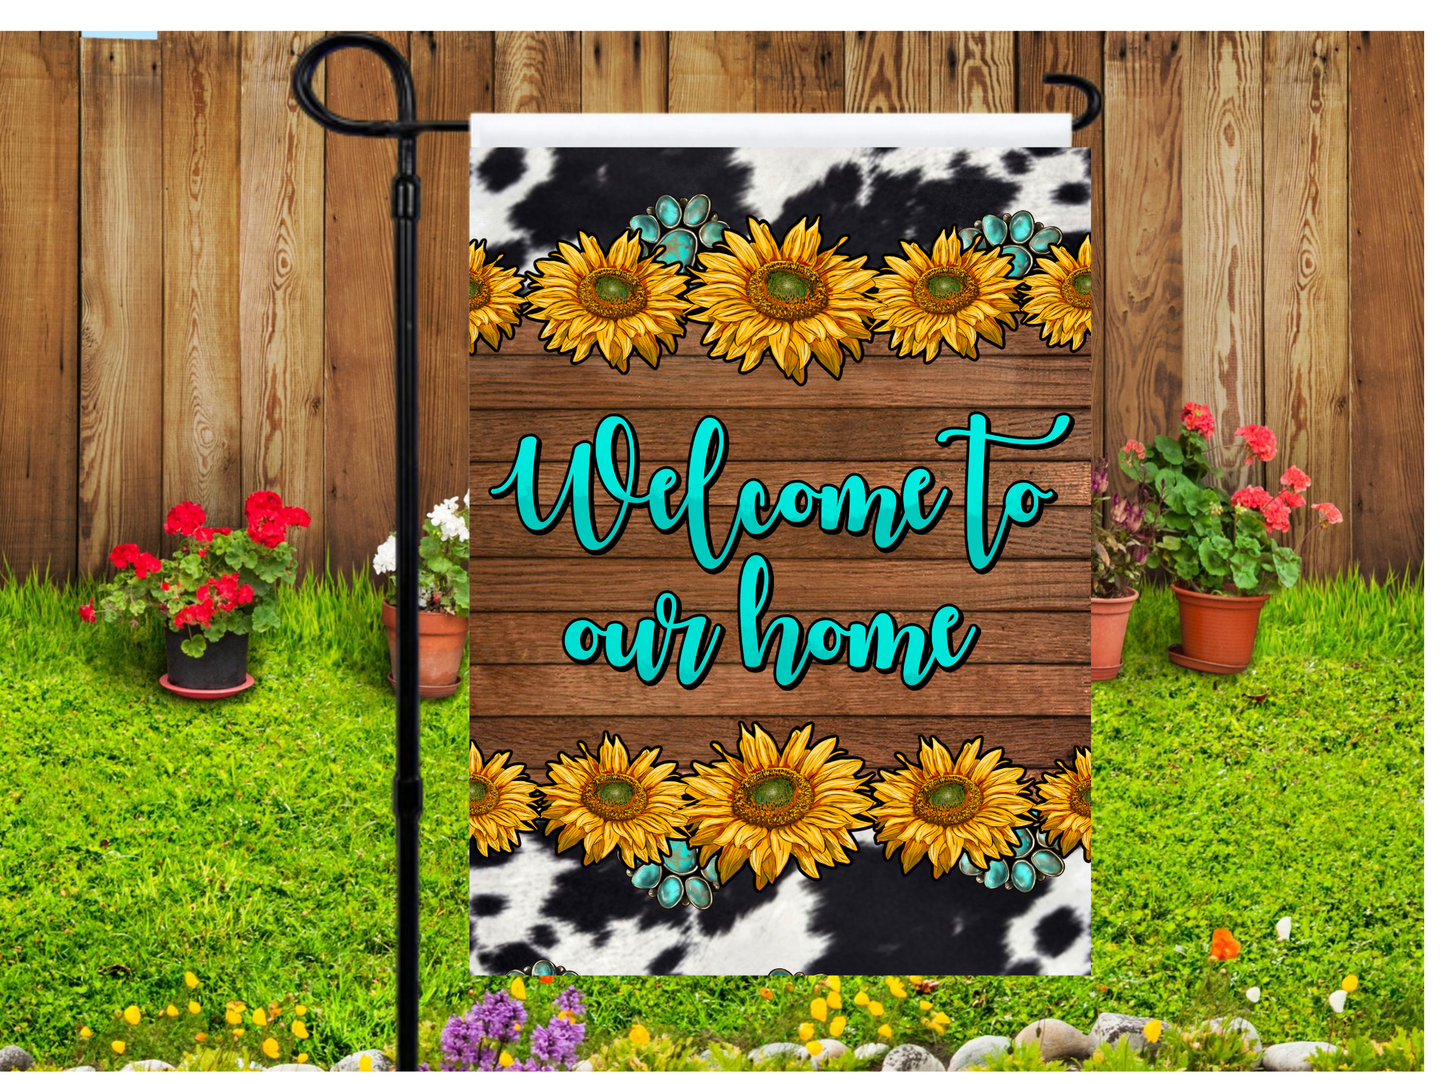 Welcome to Our Home Sunfllower Garden Flag